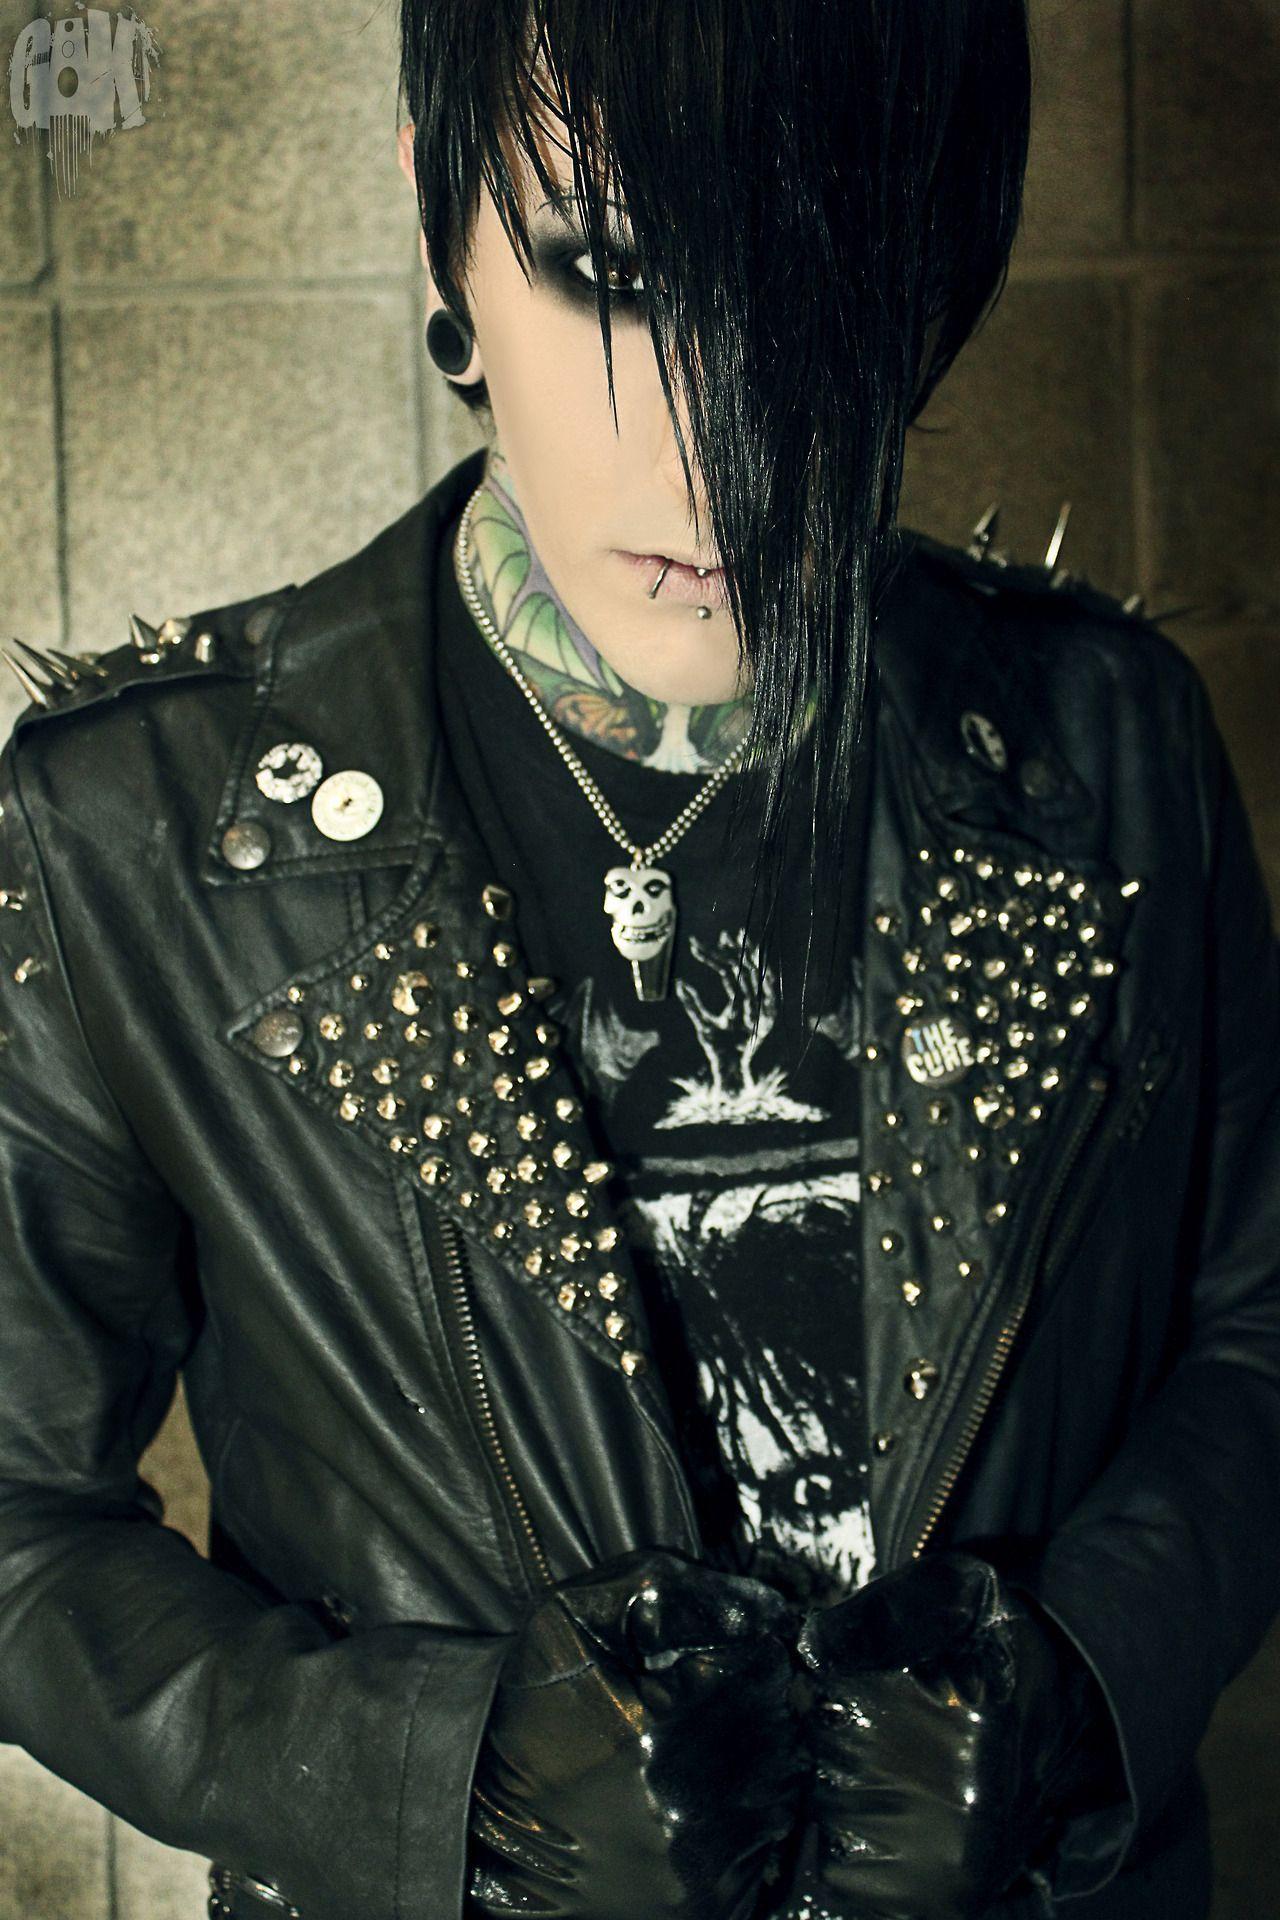 image For > Chris Motionless 2014. Motionless In White.Band